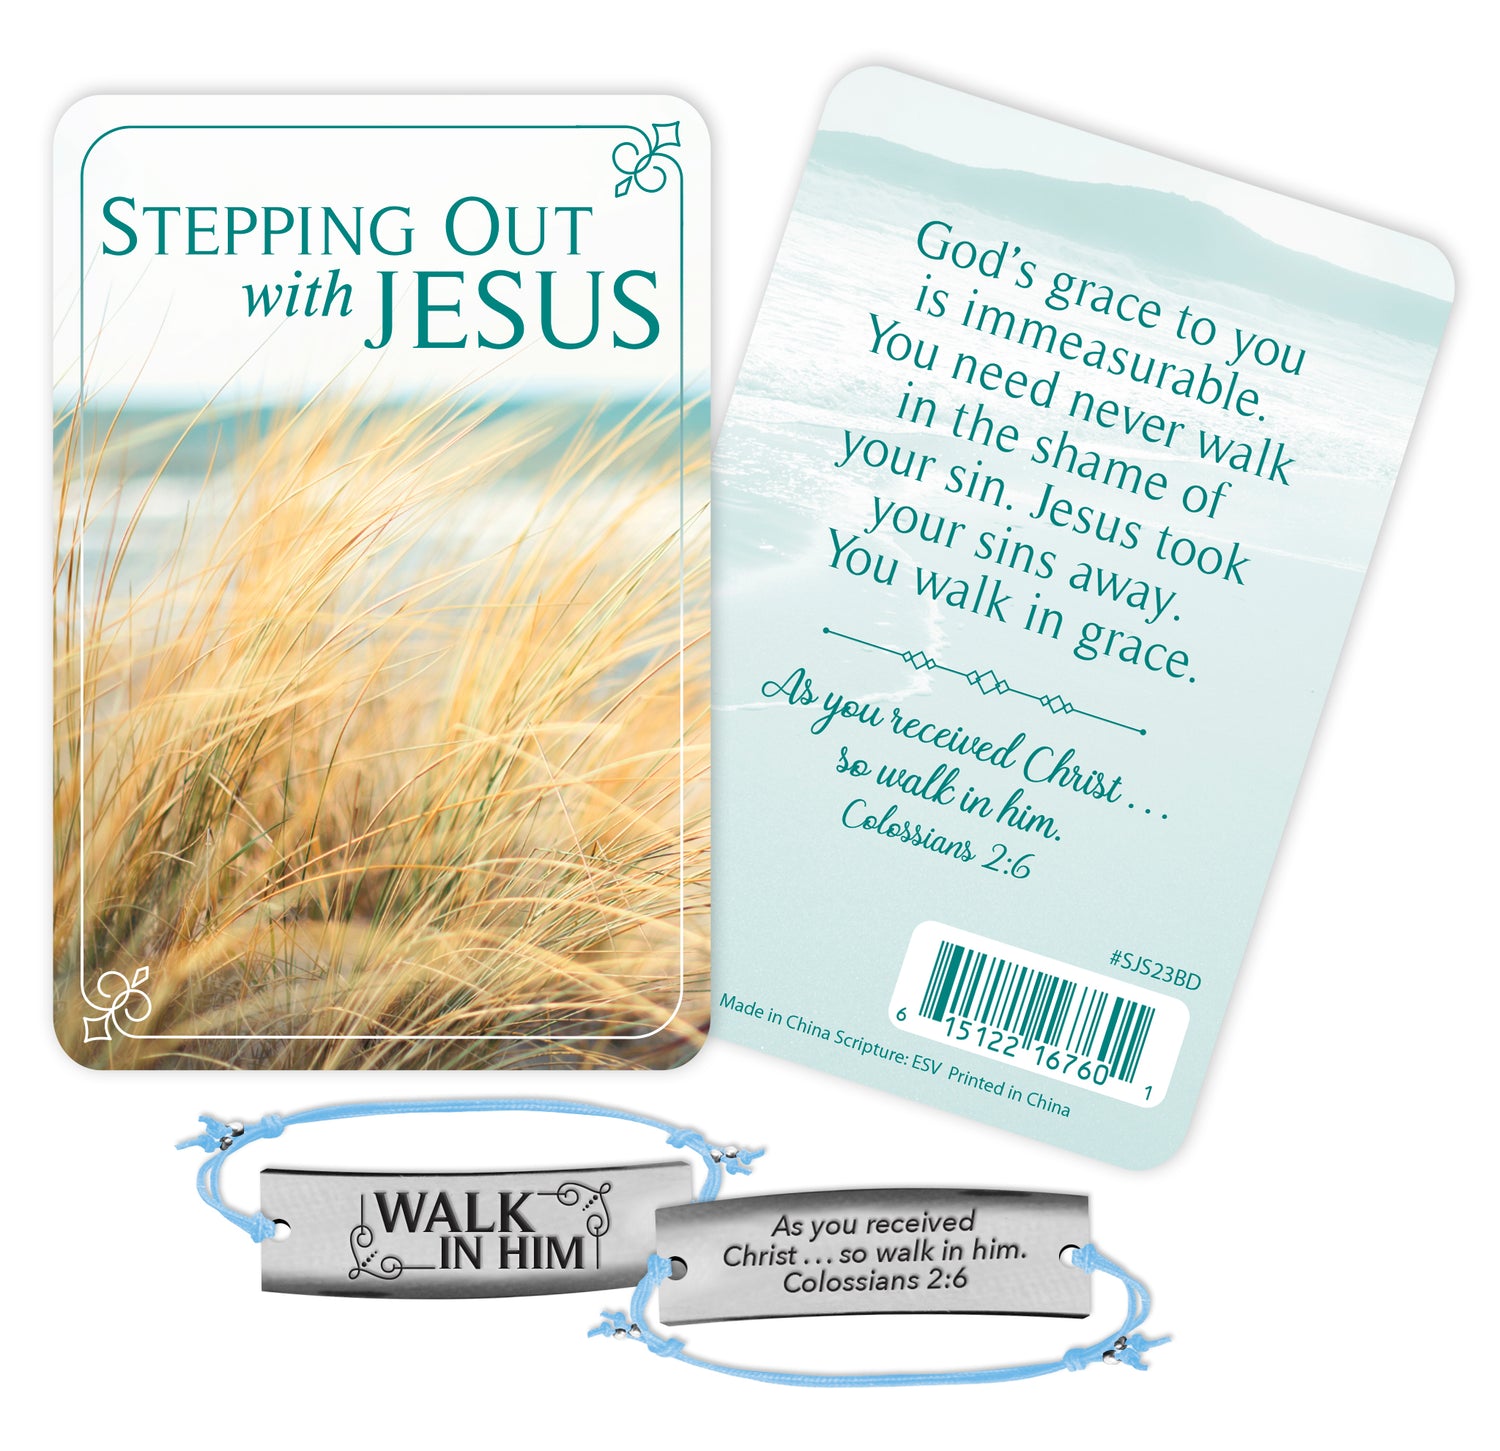 Adjustable bar bracelet & card for Christian women's ministry - Stepping Out with Jesus